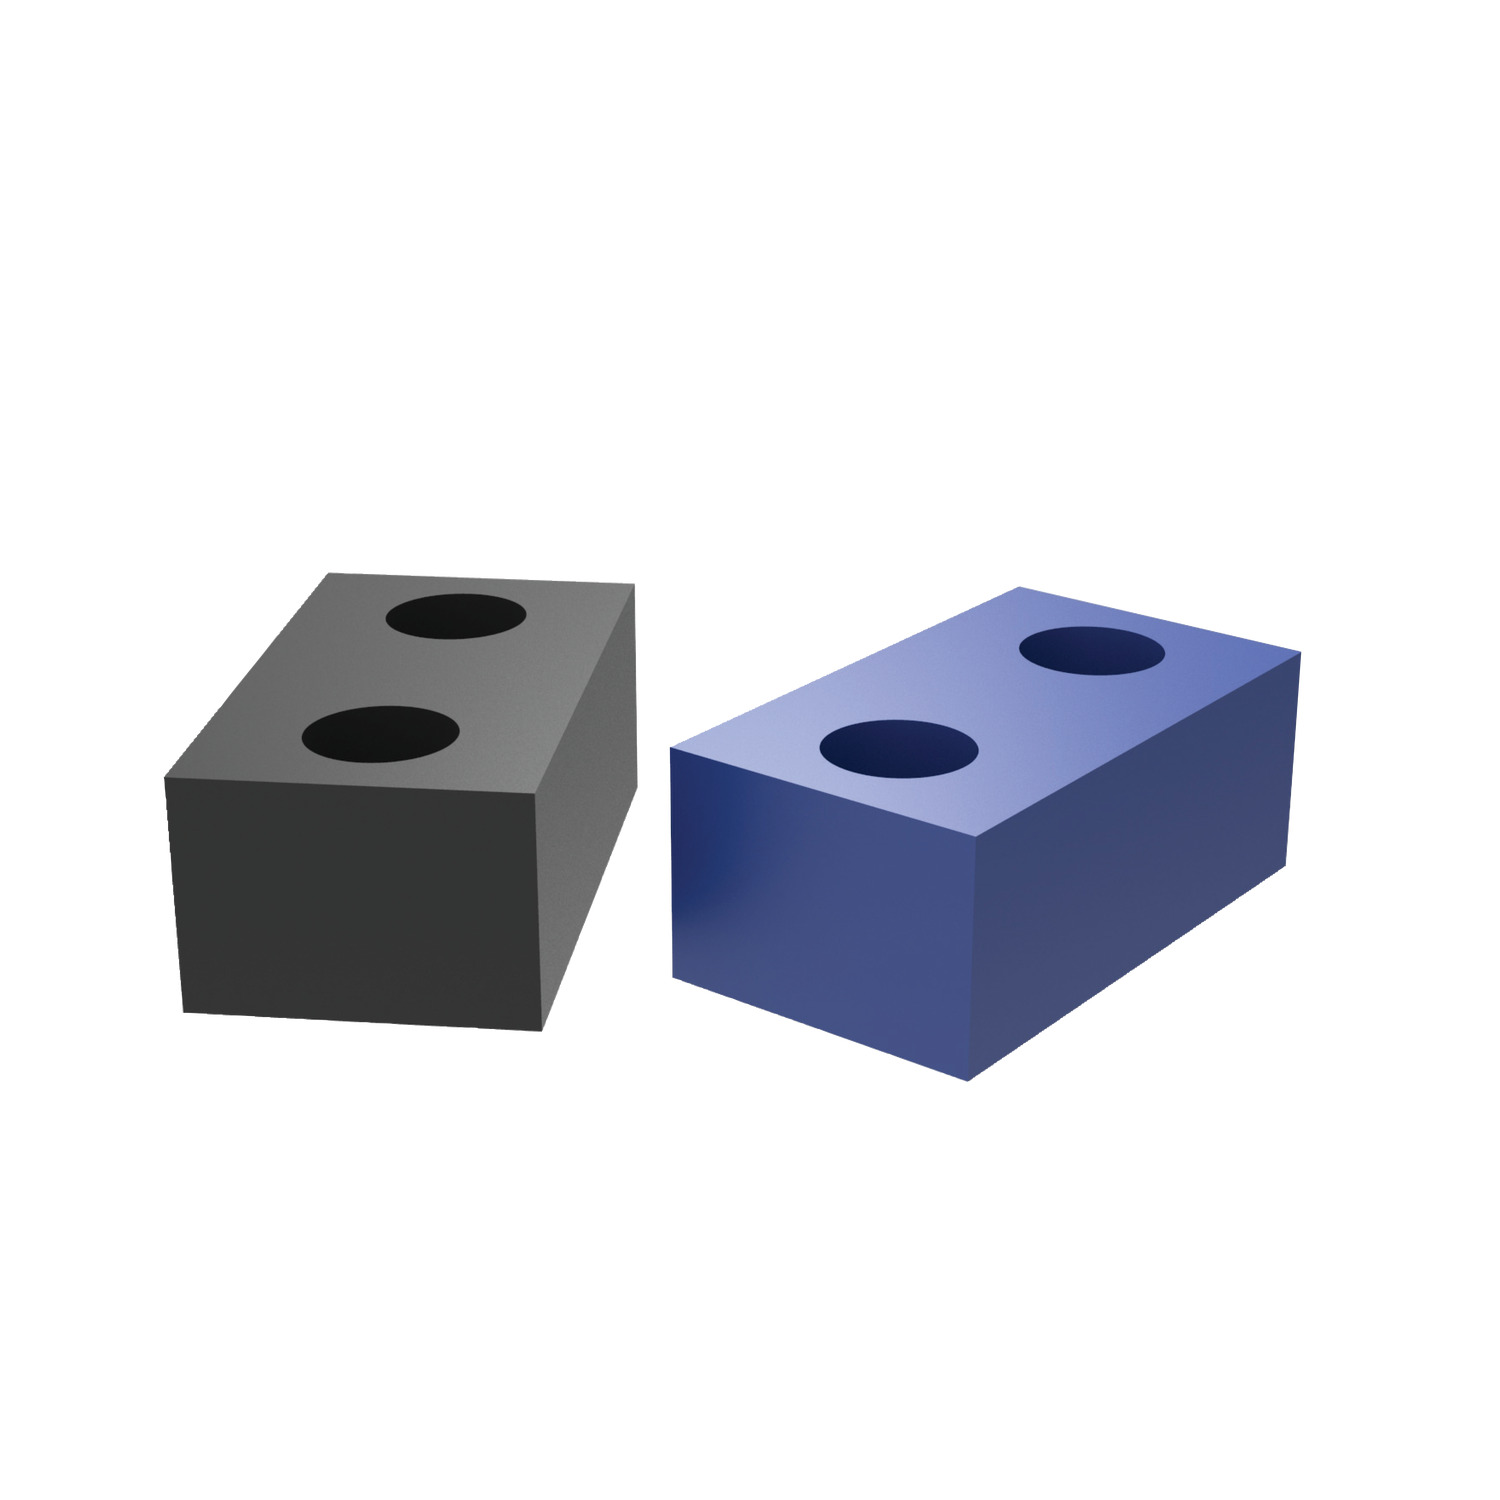 60900 - Metric Bumpers - Rectangular and Square